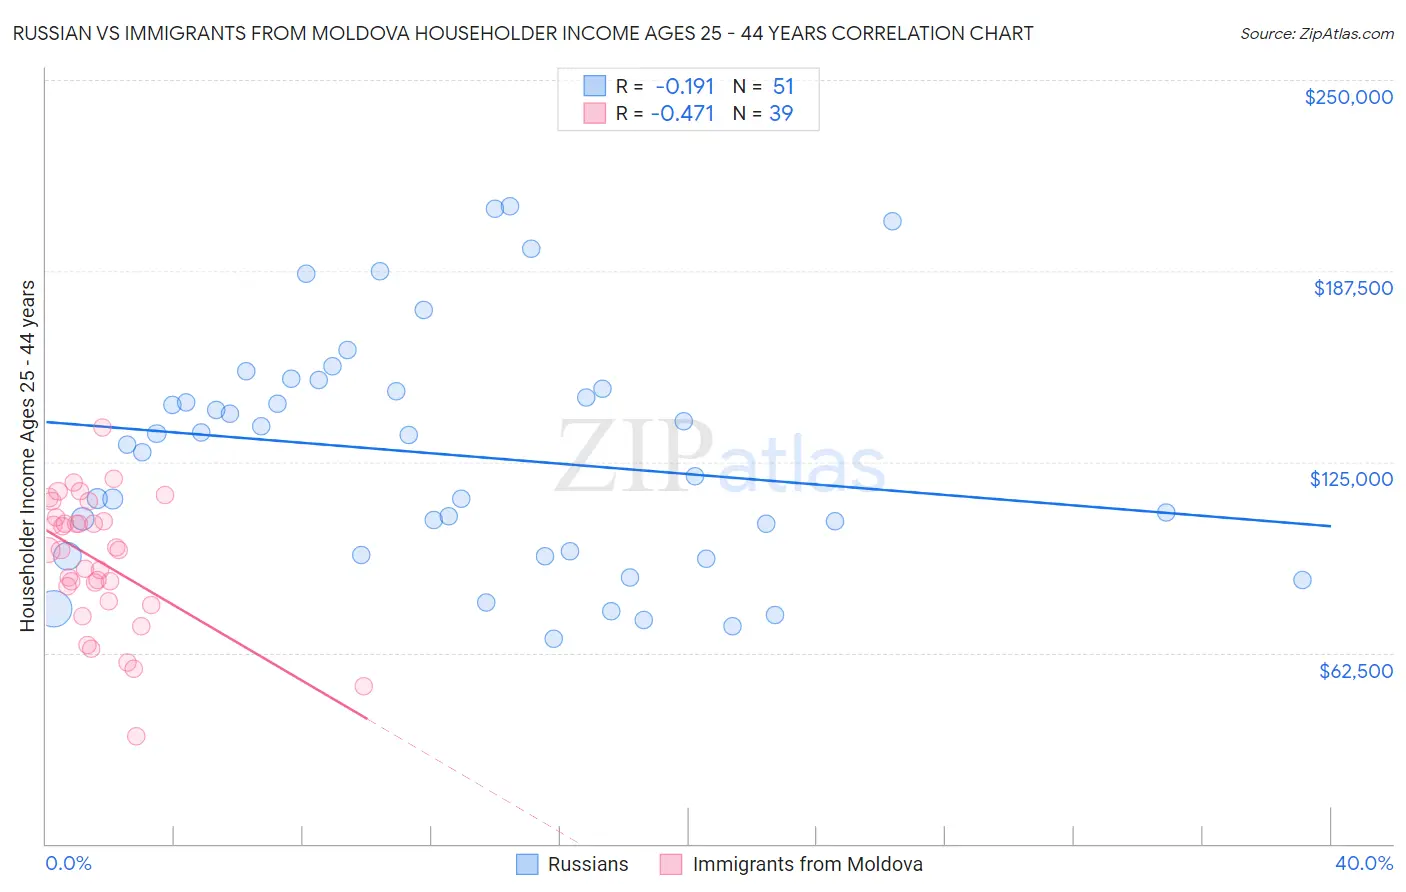 Russian vs Immigrants from Moldova Householder Income Ages 25 - 44 years